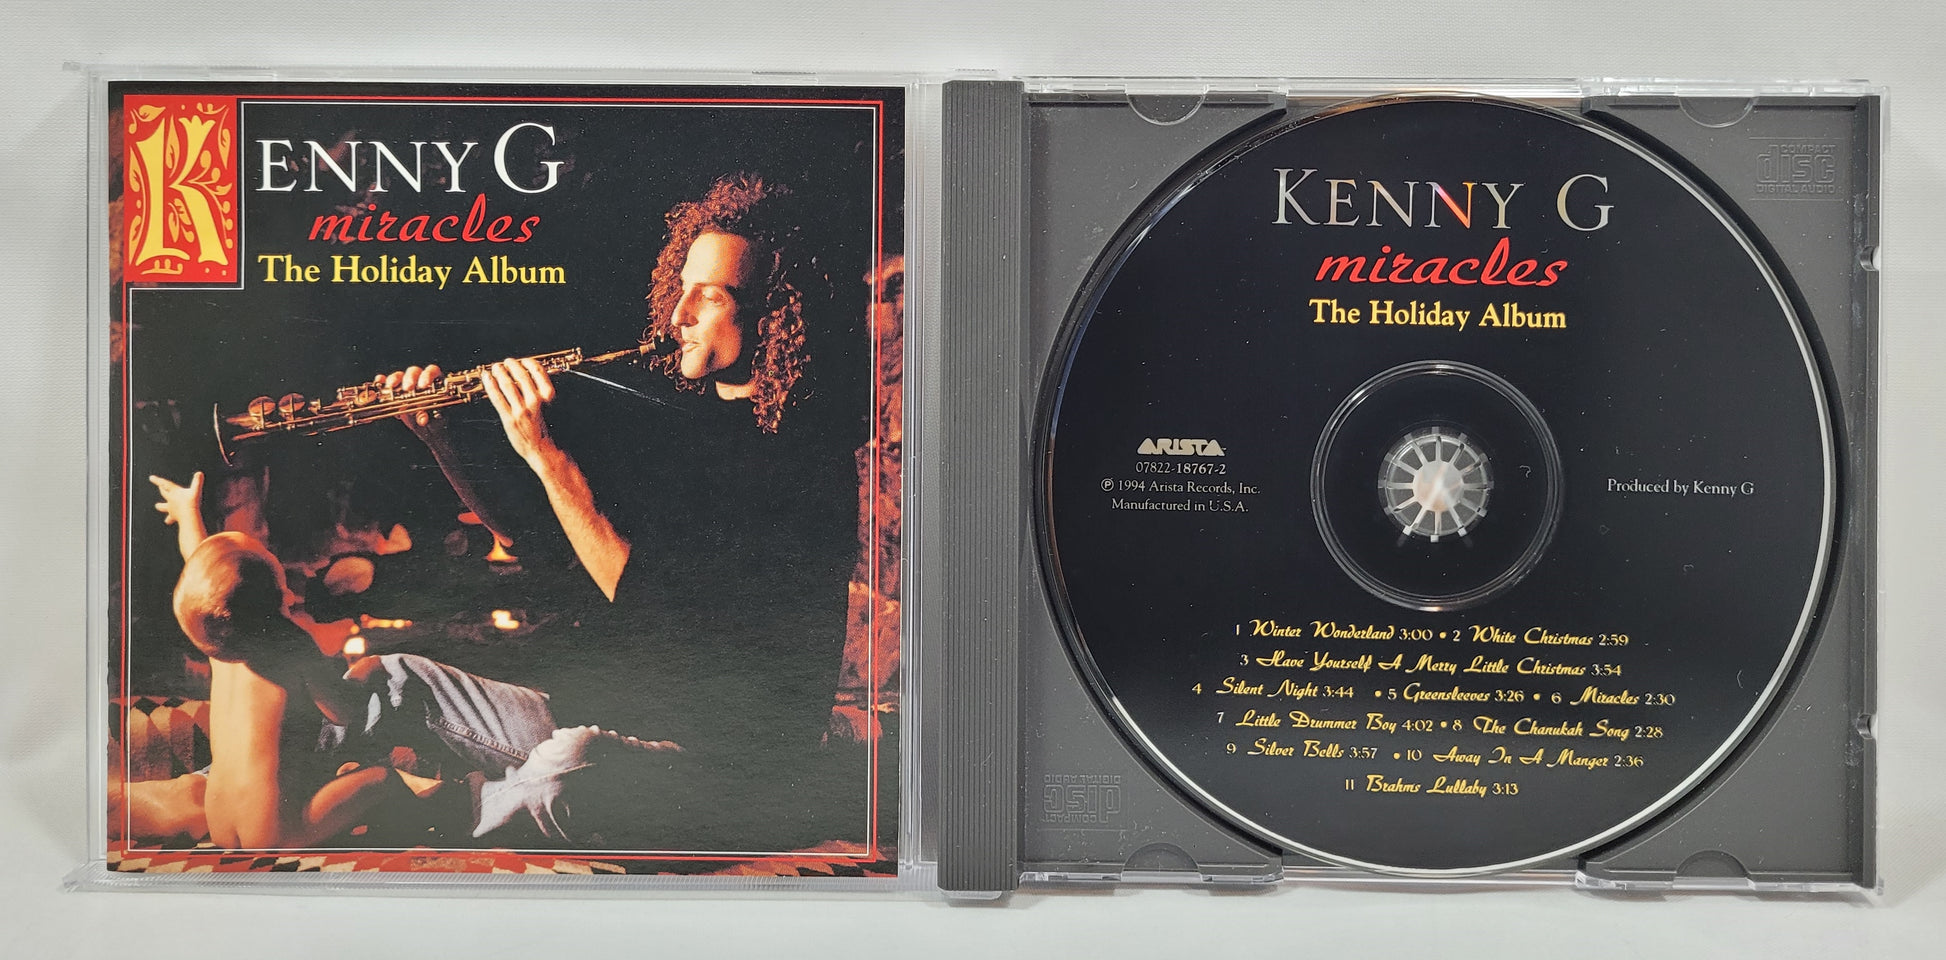 Kenny G - Miracles (The Holiday Album) [1994 Used CD]